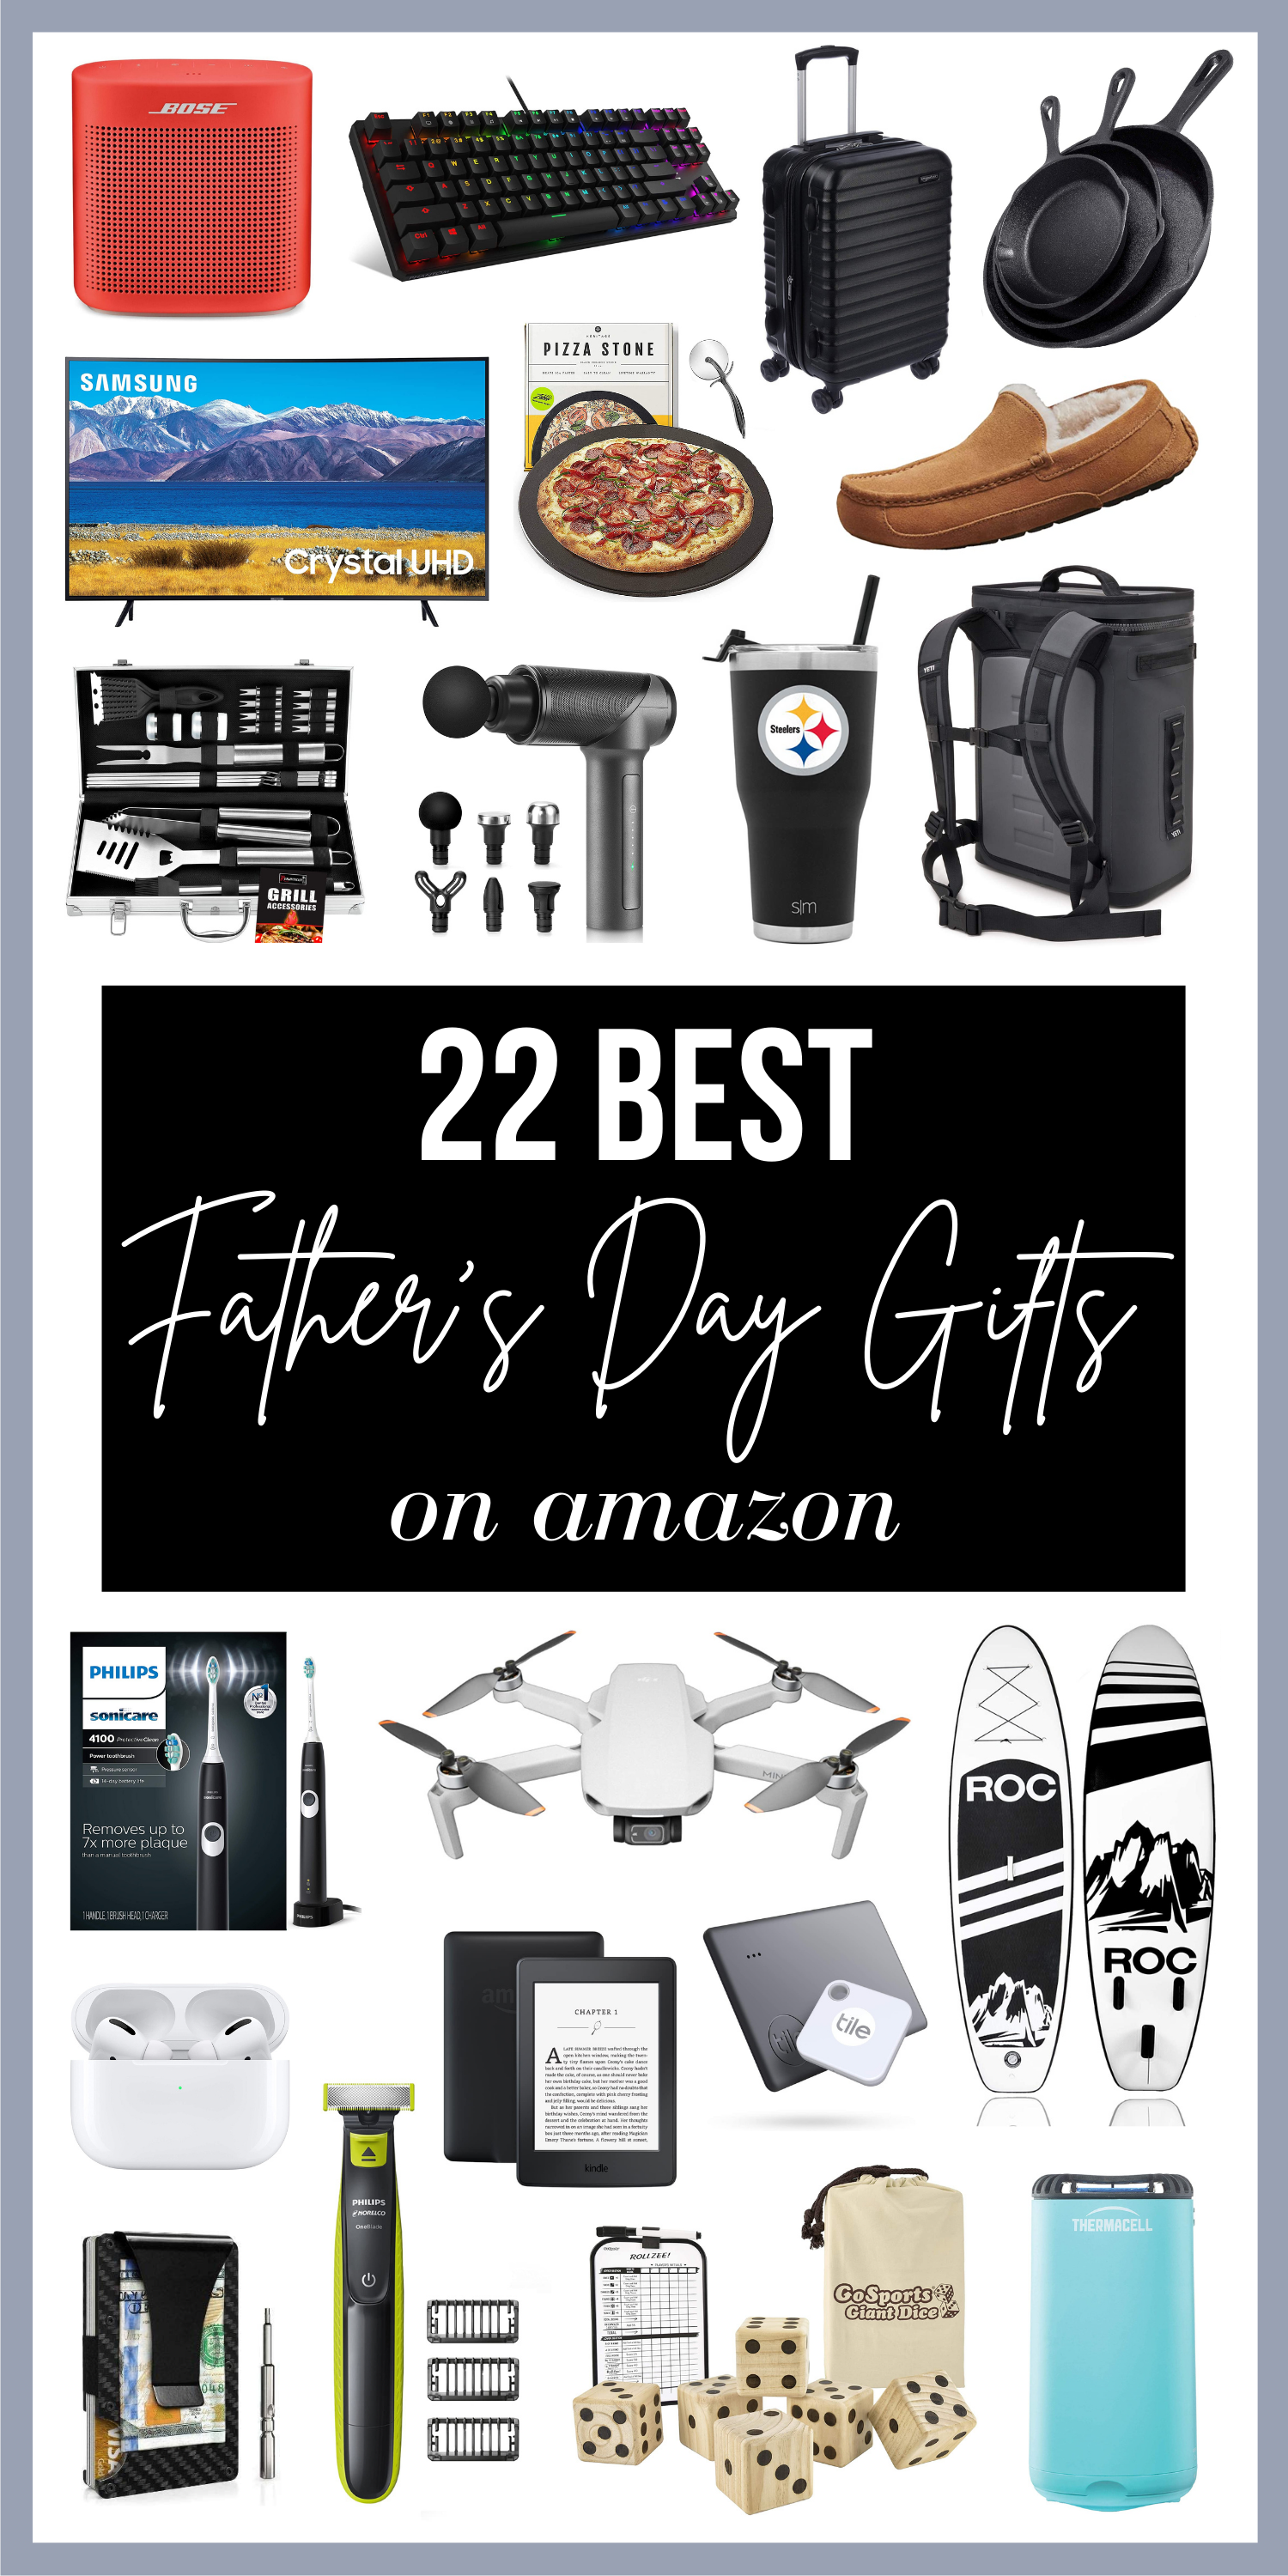 https://hollyhabeck.com/wp-content/uploads/2021/04/Amazon-Fathers-Day.png